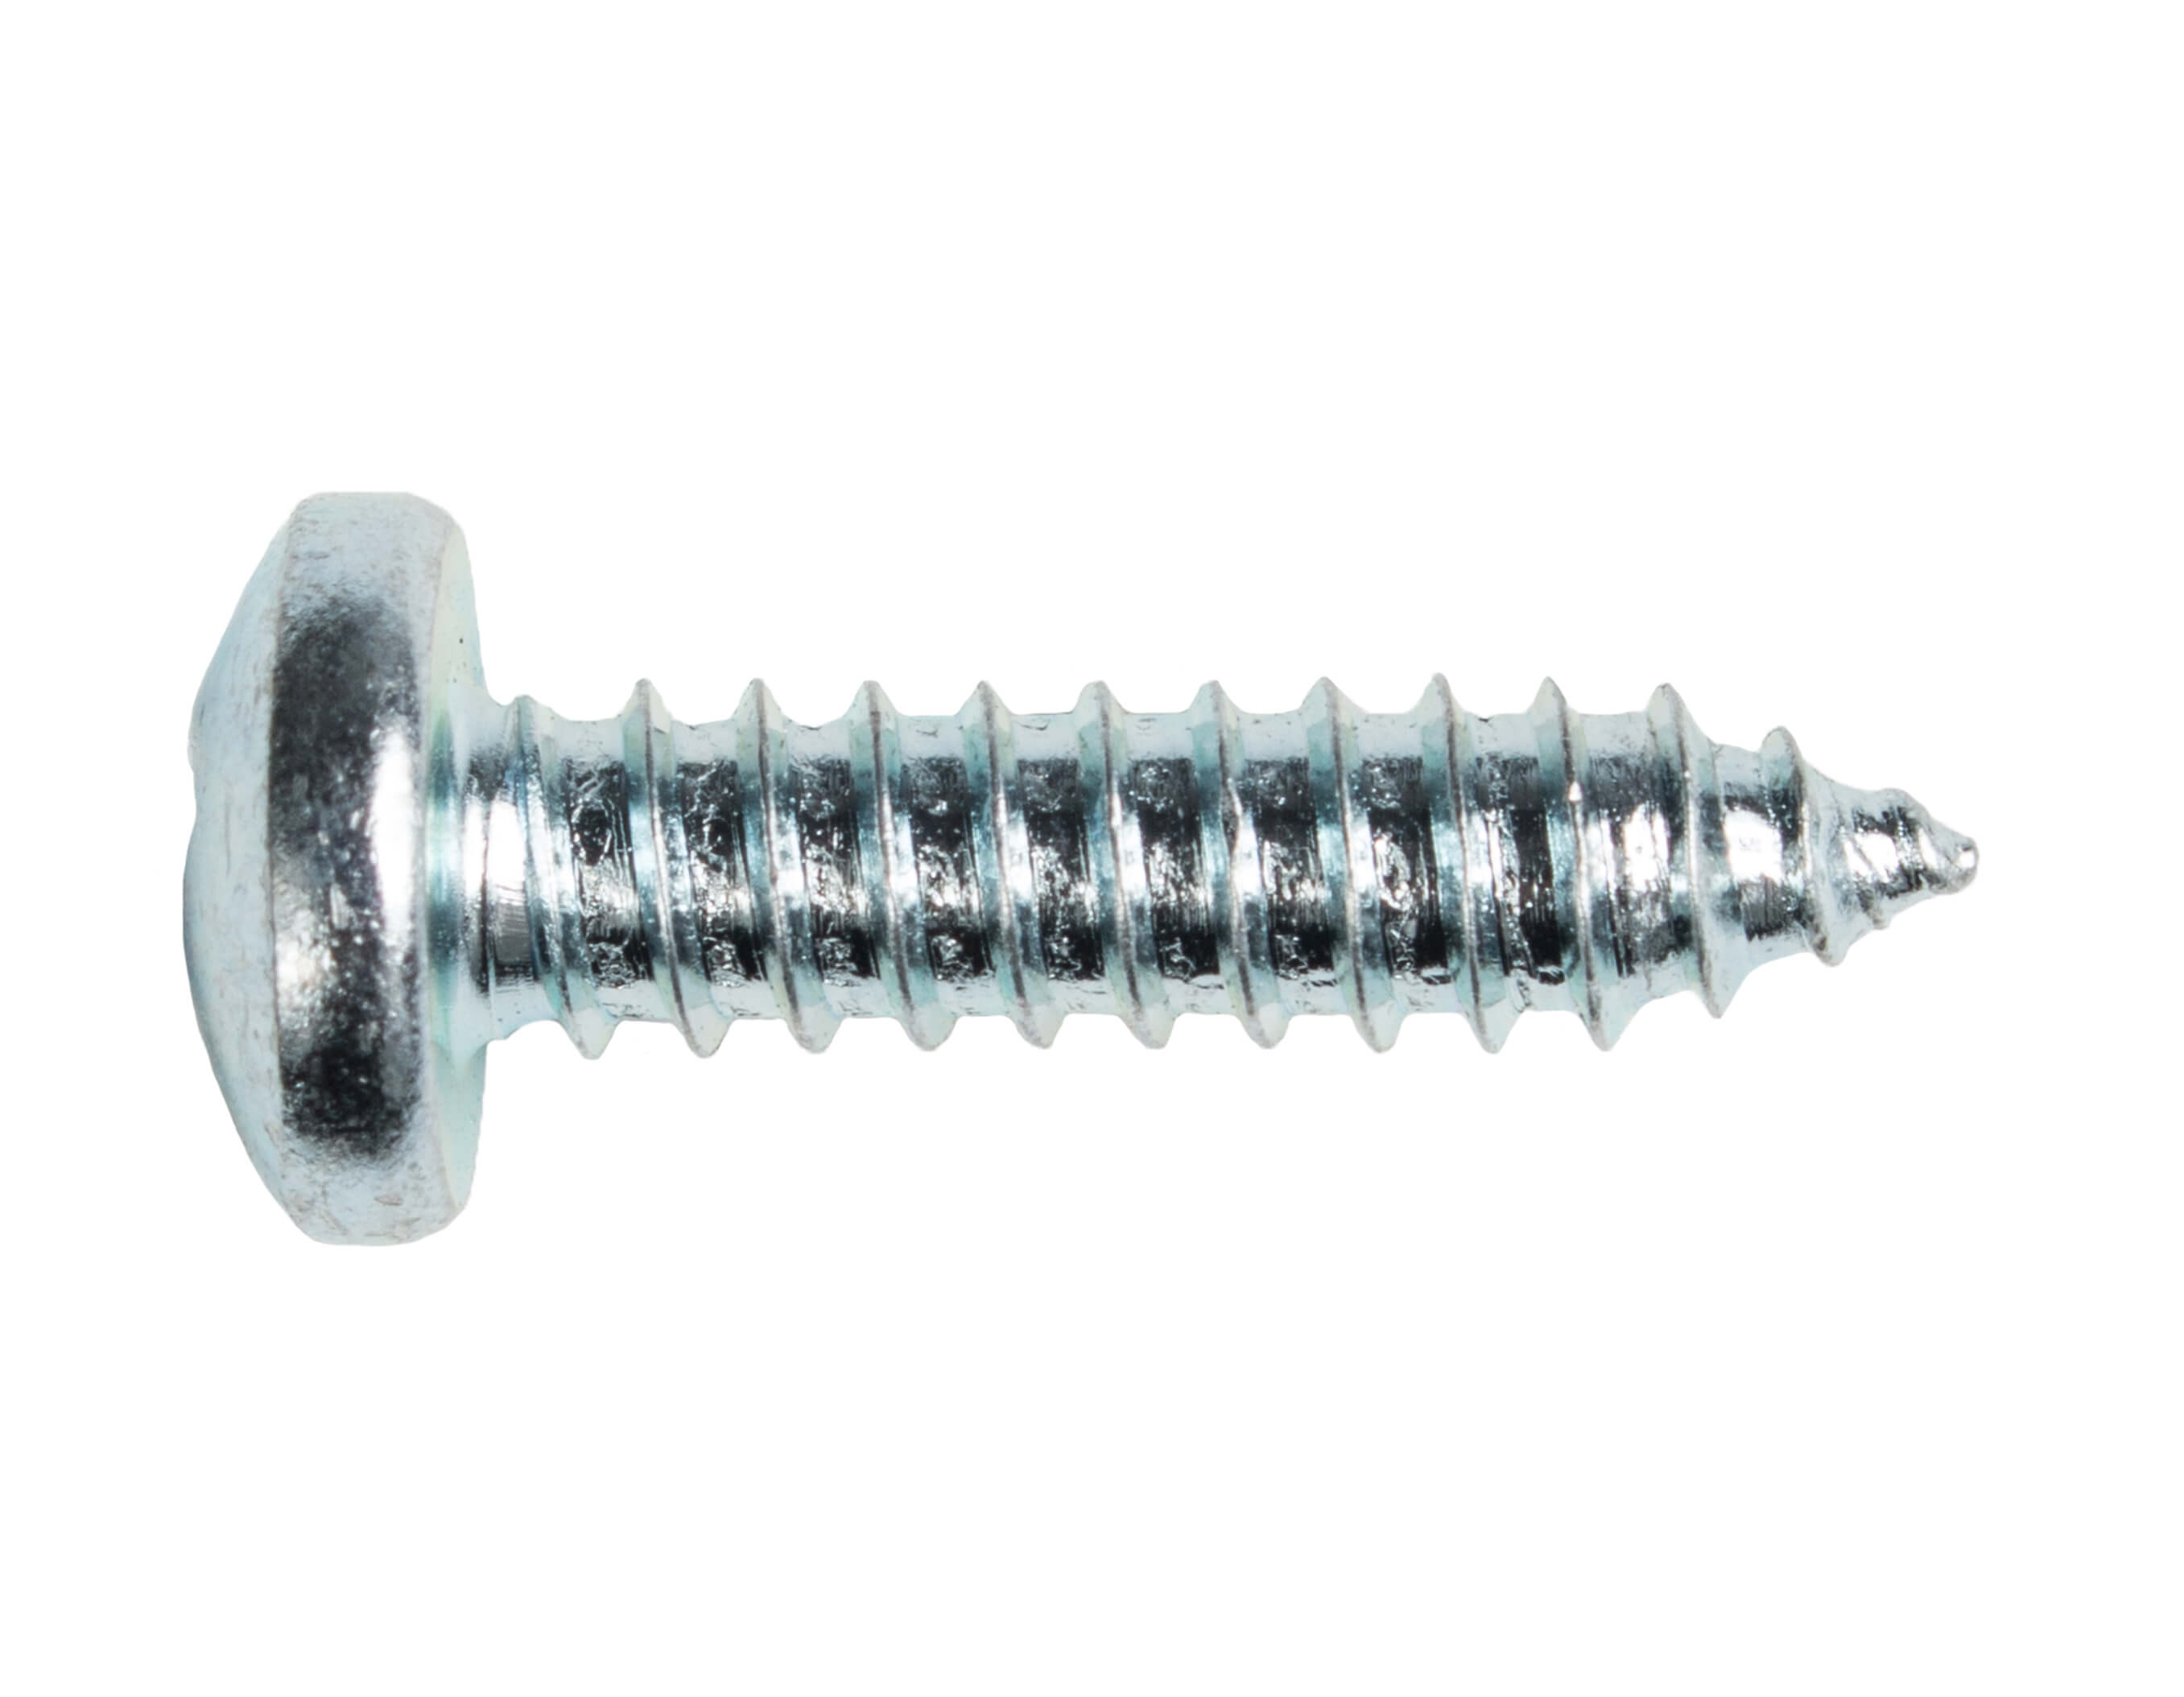 5.5X16 SMS (TAPPING) SCREW PAN PH ZN DIN7981